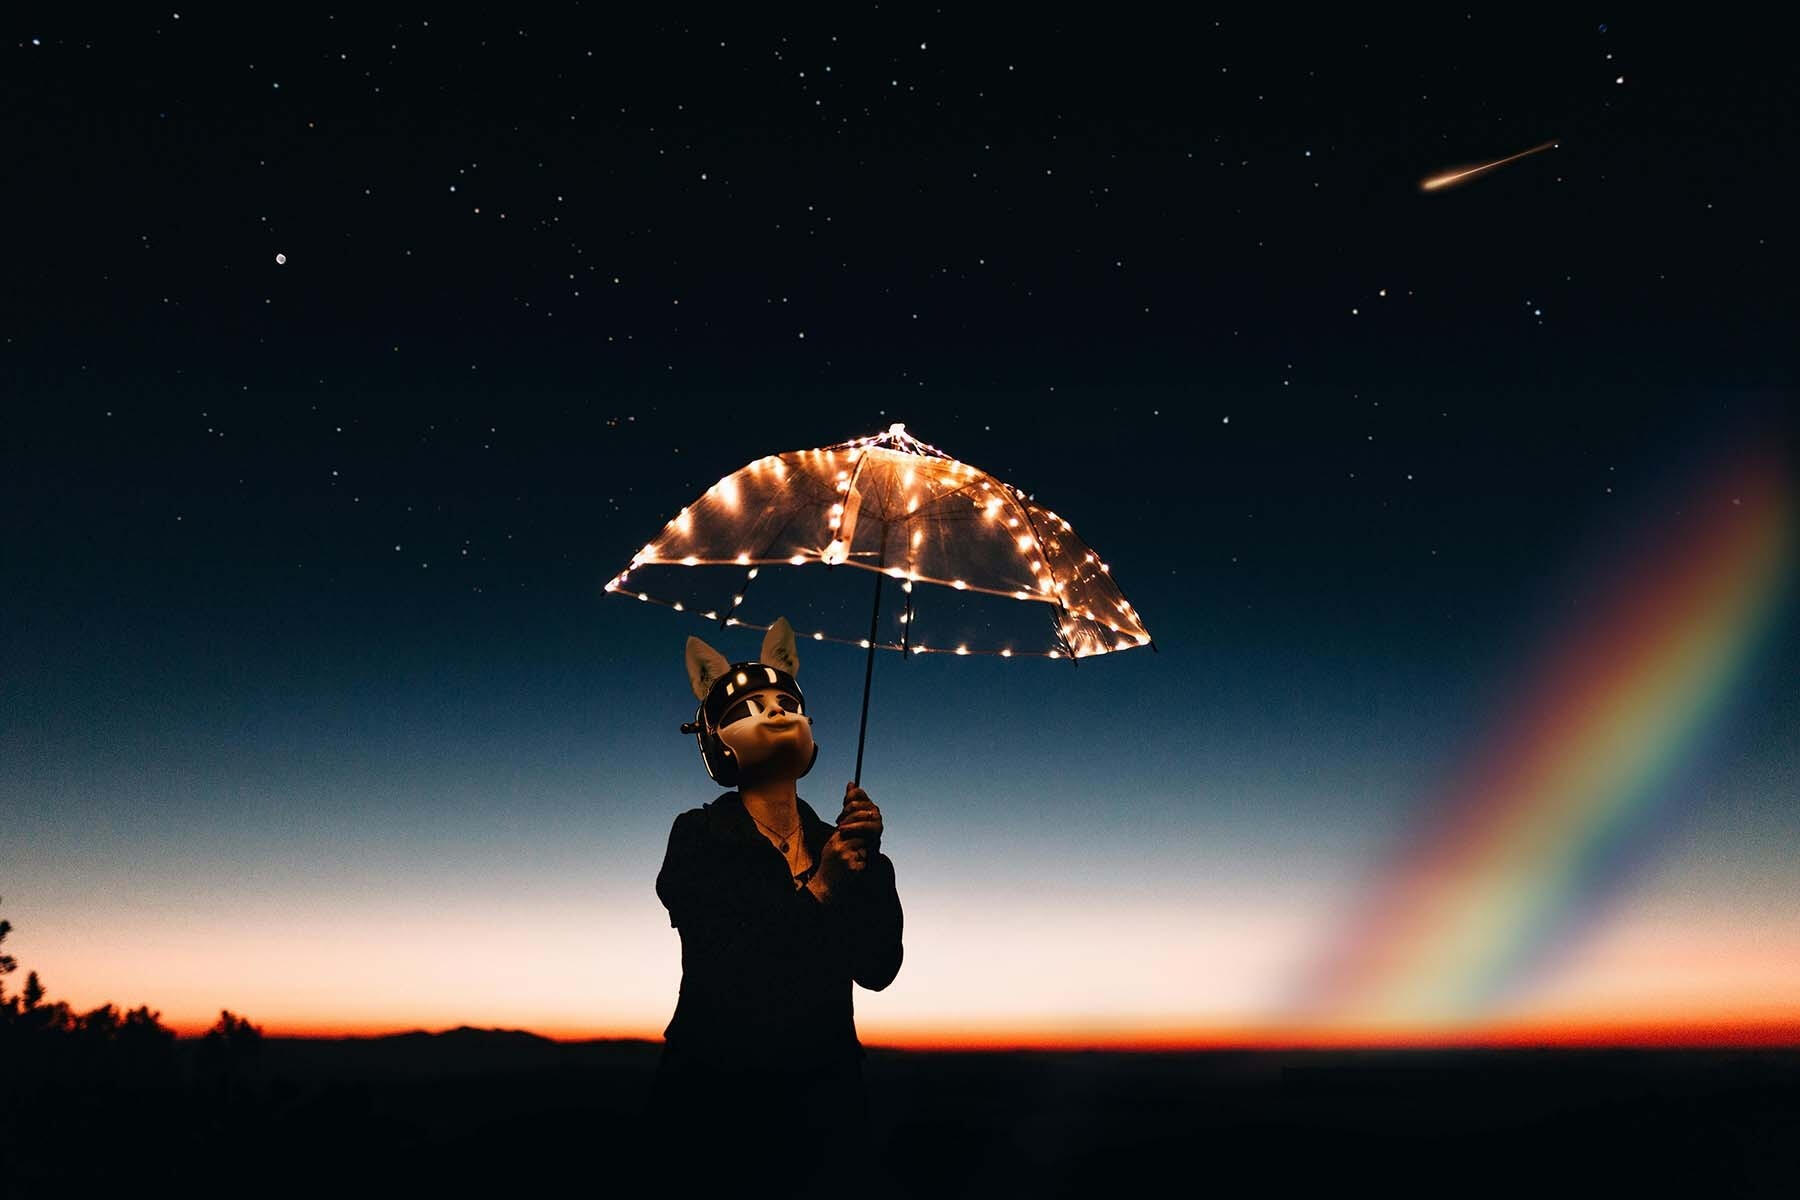 A space cat under an umbrella of LED lights with a rainbow